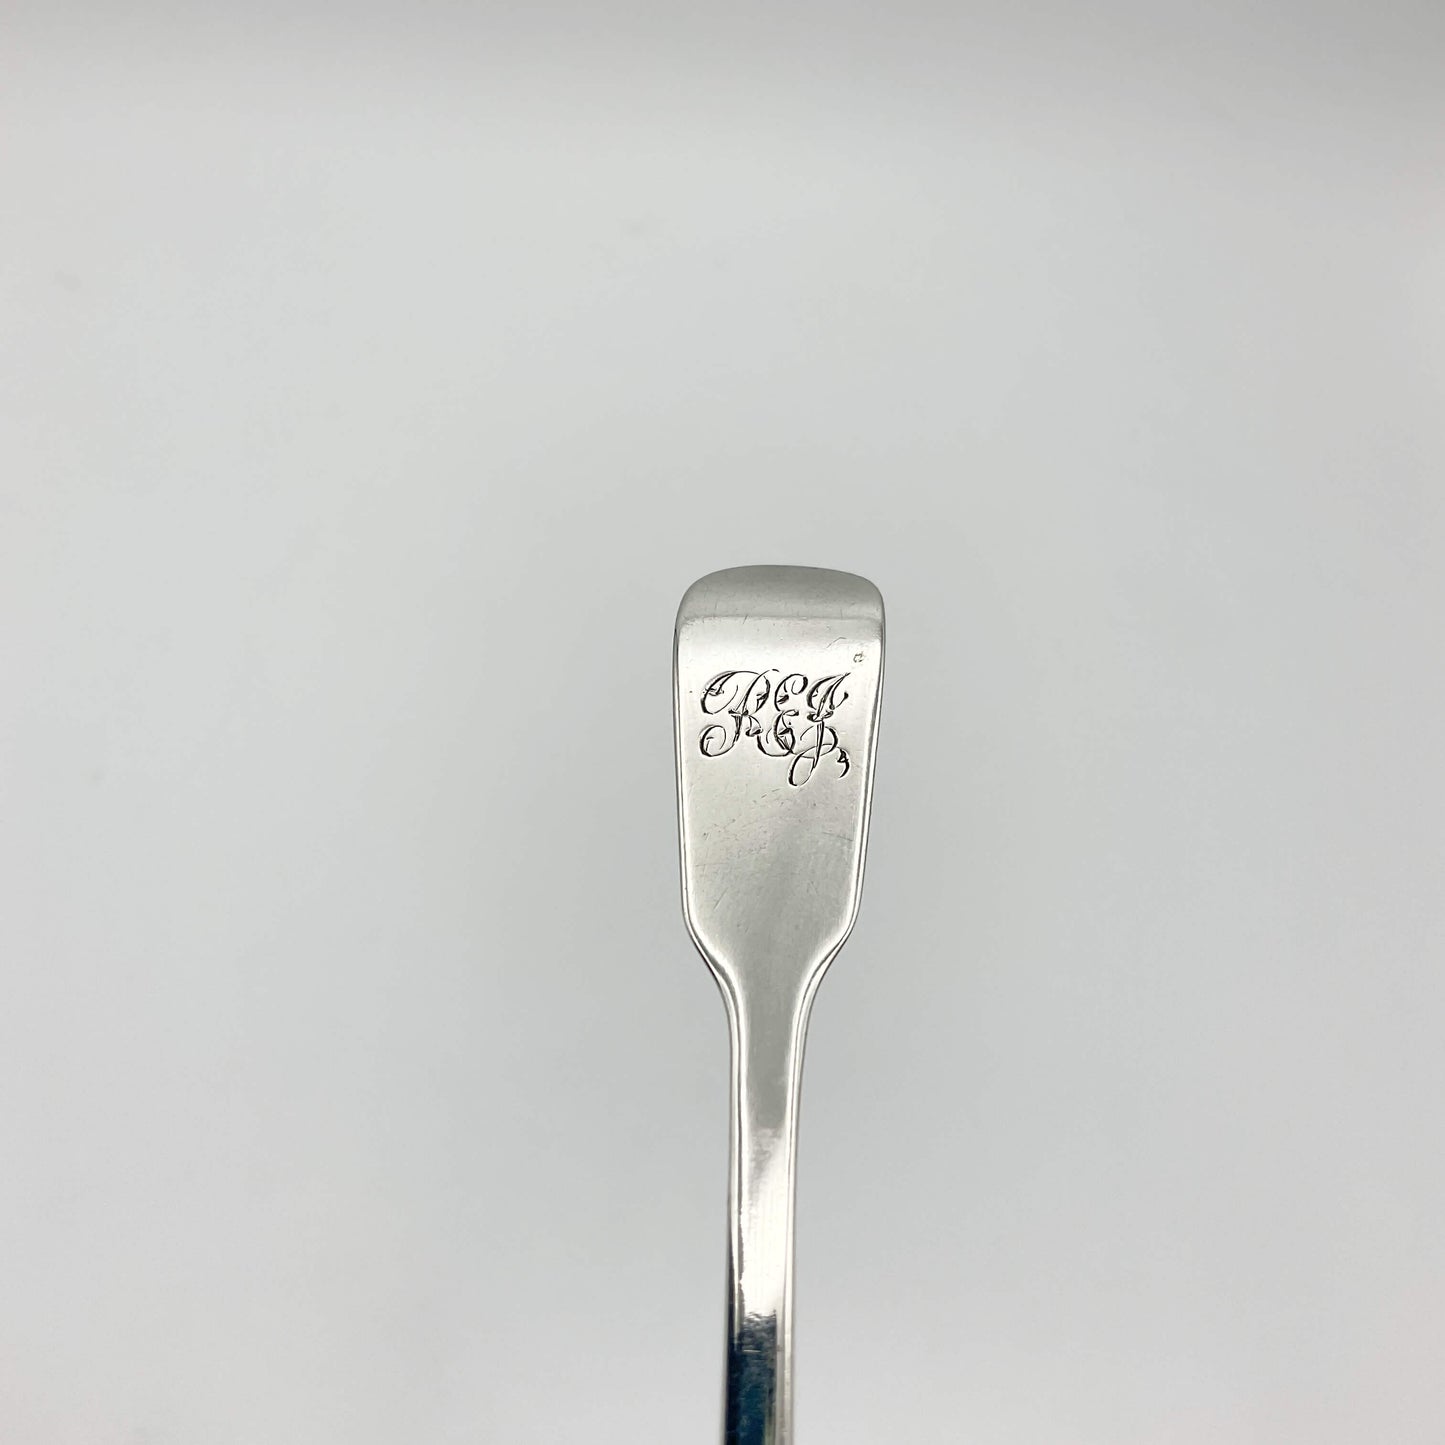 Antique silver condiment spoon handle with REJ engraved at the top